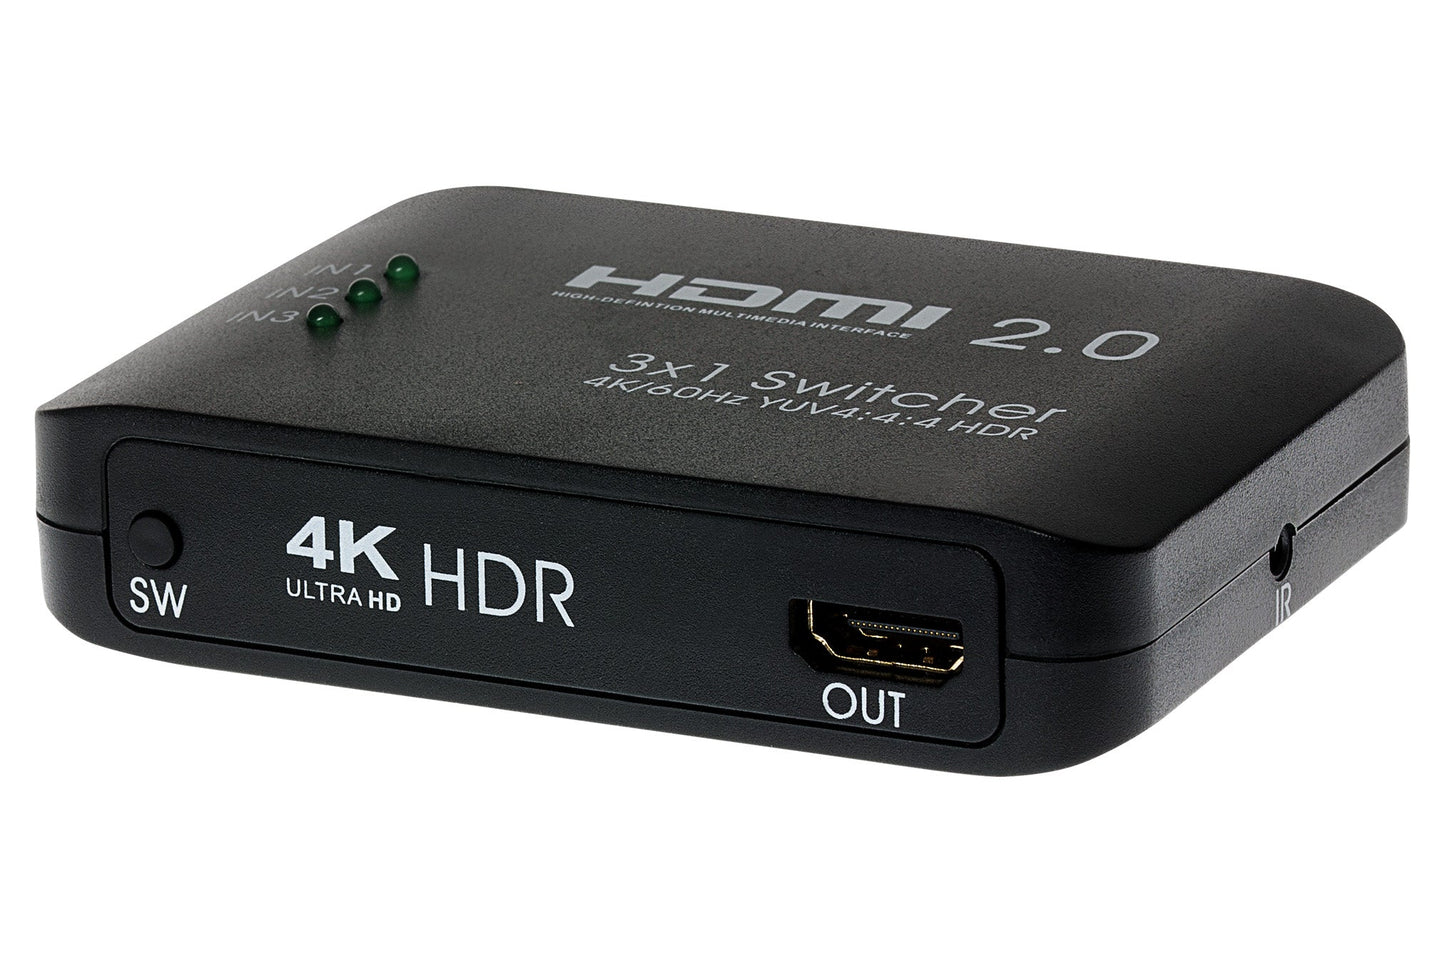 MPS HDMI Switch 3 Ports in 1 Port Out 4K 60Hz Resolution with Remote Control - Black - maplin.co.uk